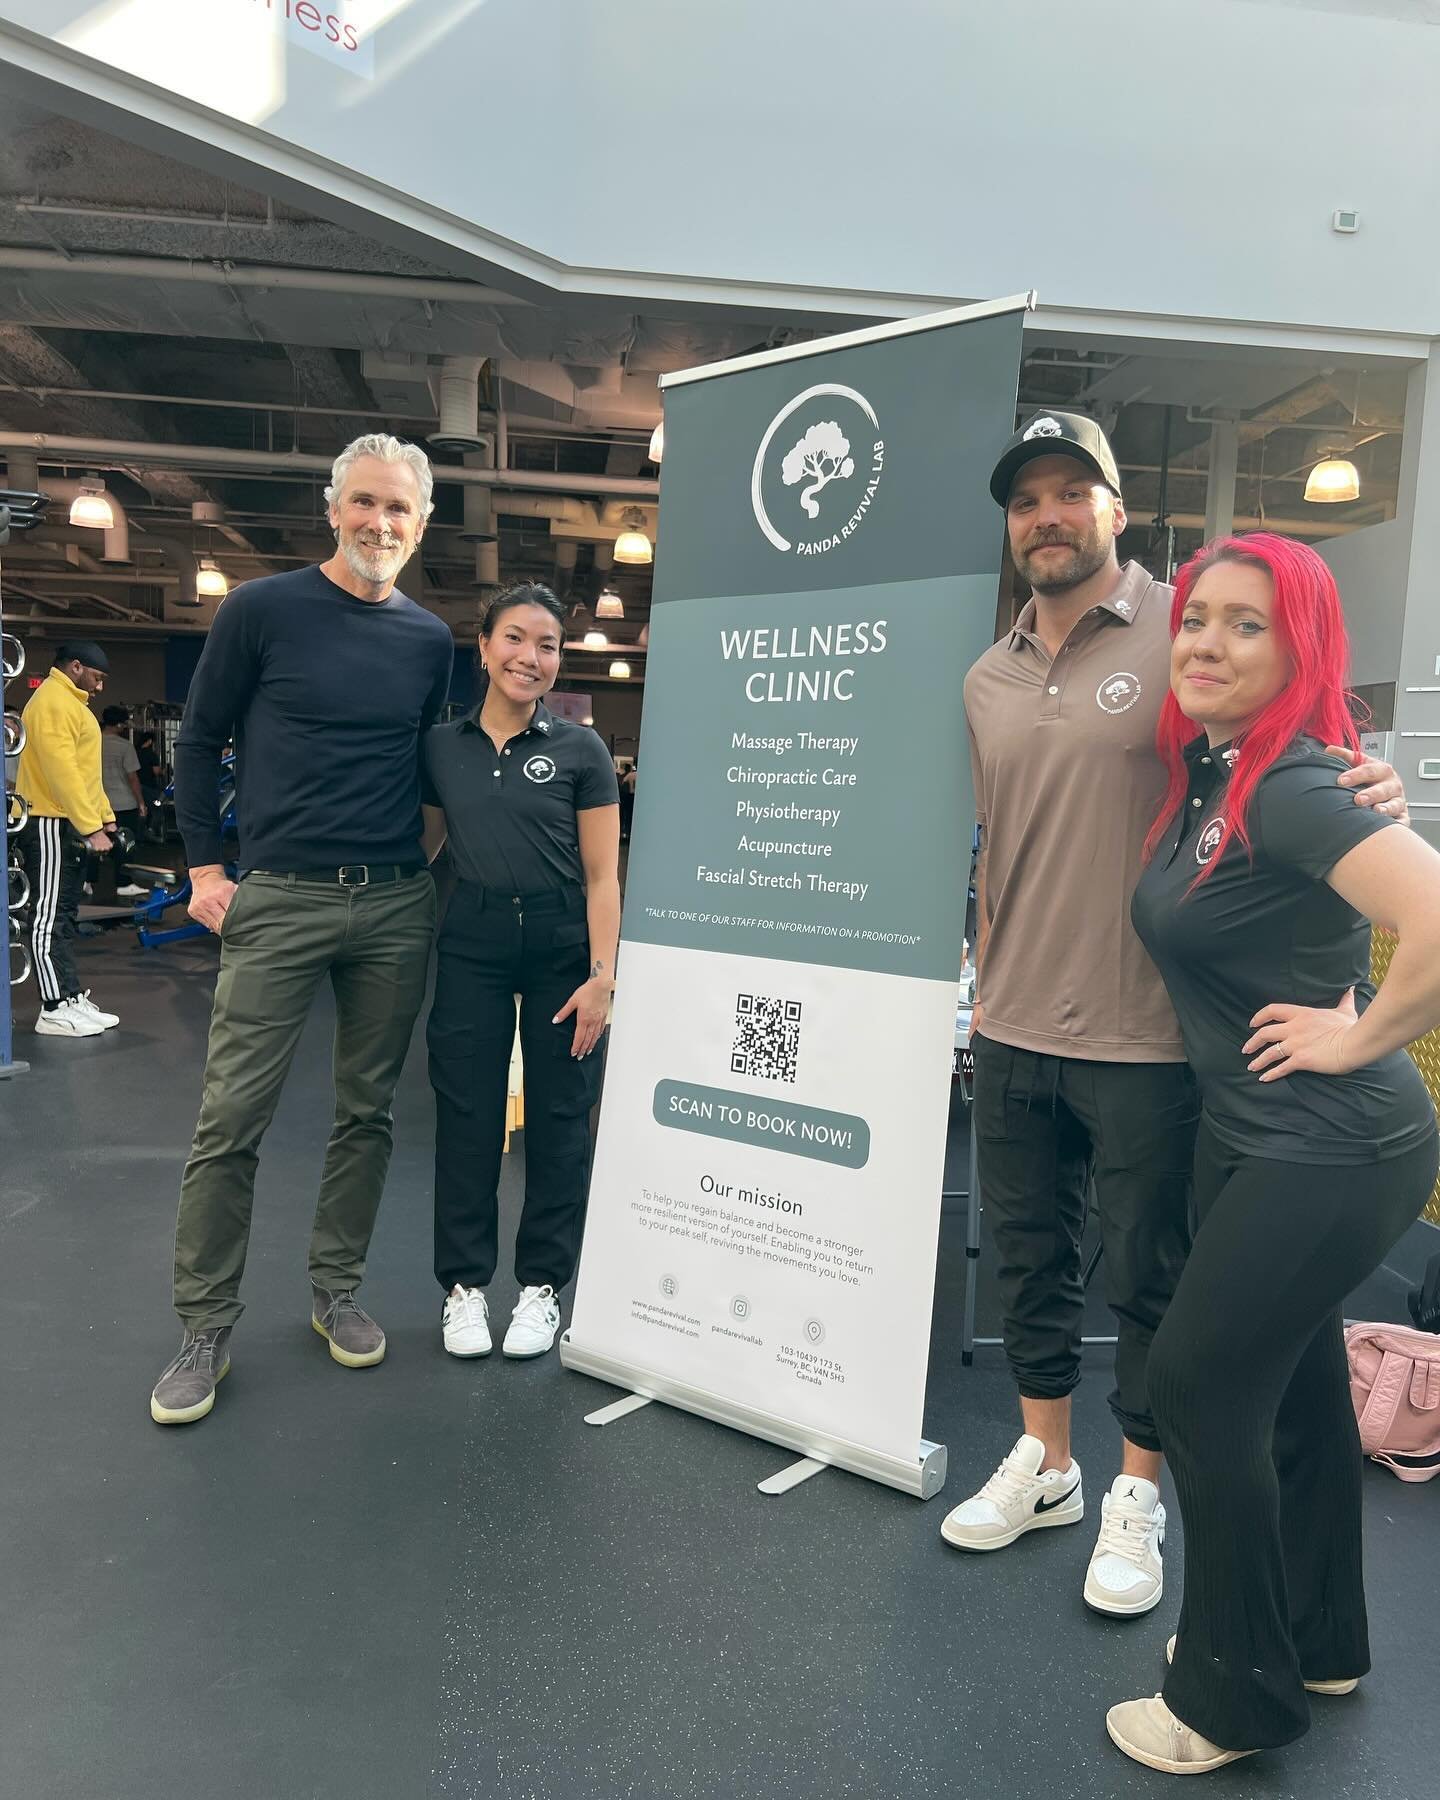 THANK YOU @trevor_linden and @trevorlindenfitness for allowing us to hangout and showcase our services on your member appreciation day! We had such a blast and cannot wait to be back for the next one!
-
-
-
🐼🐼🐼